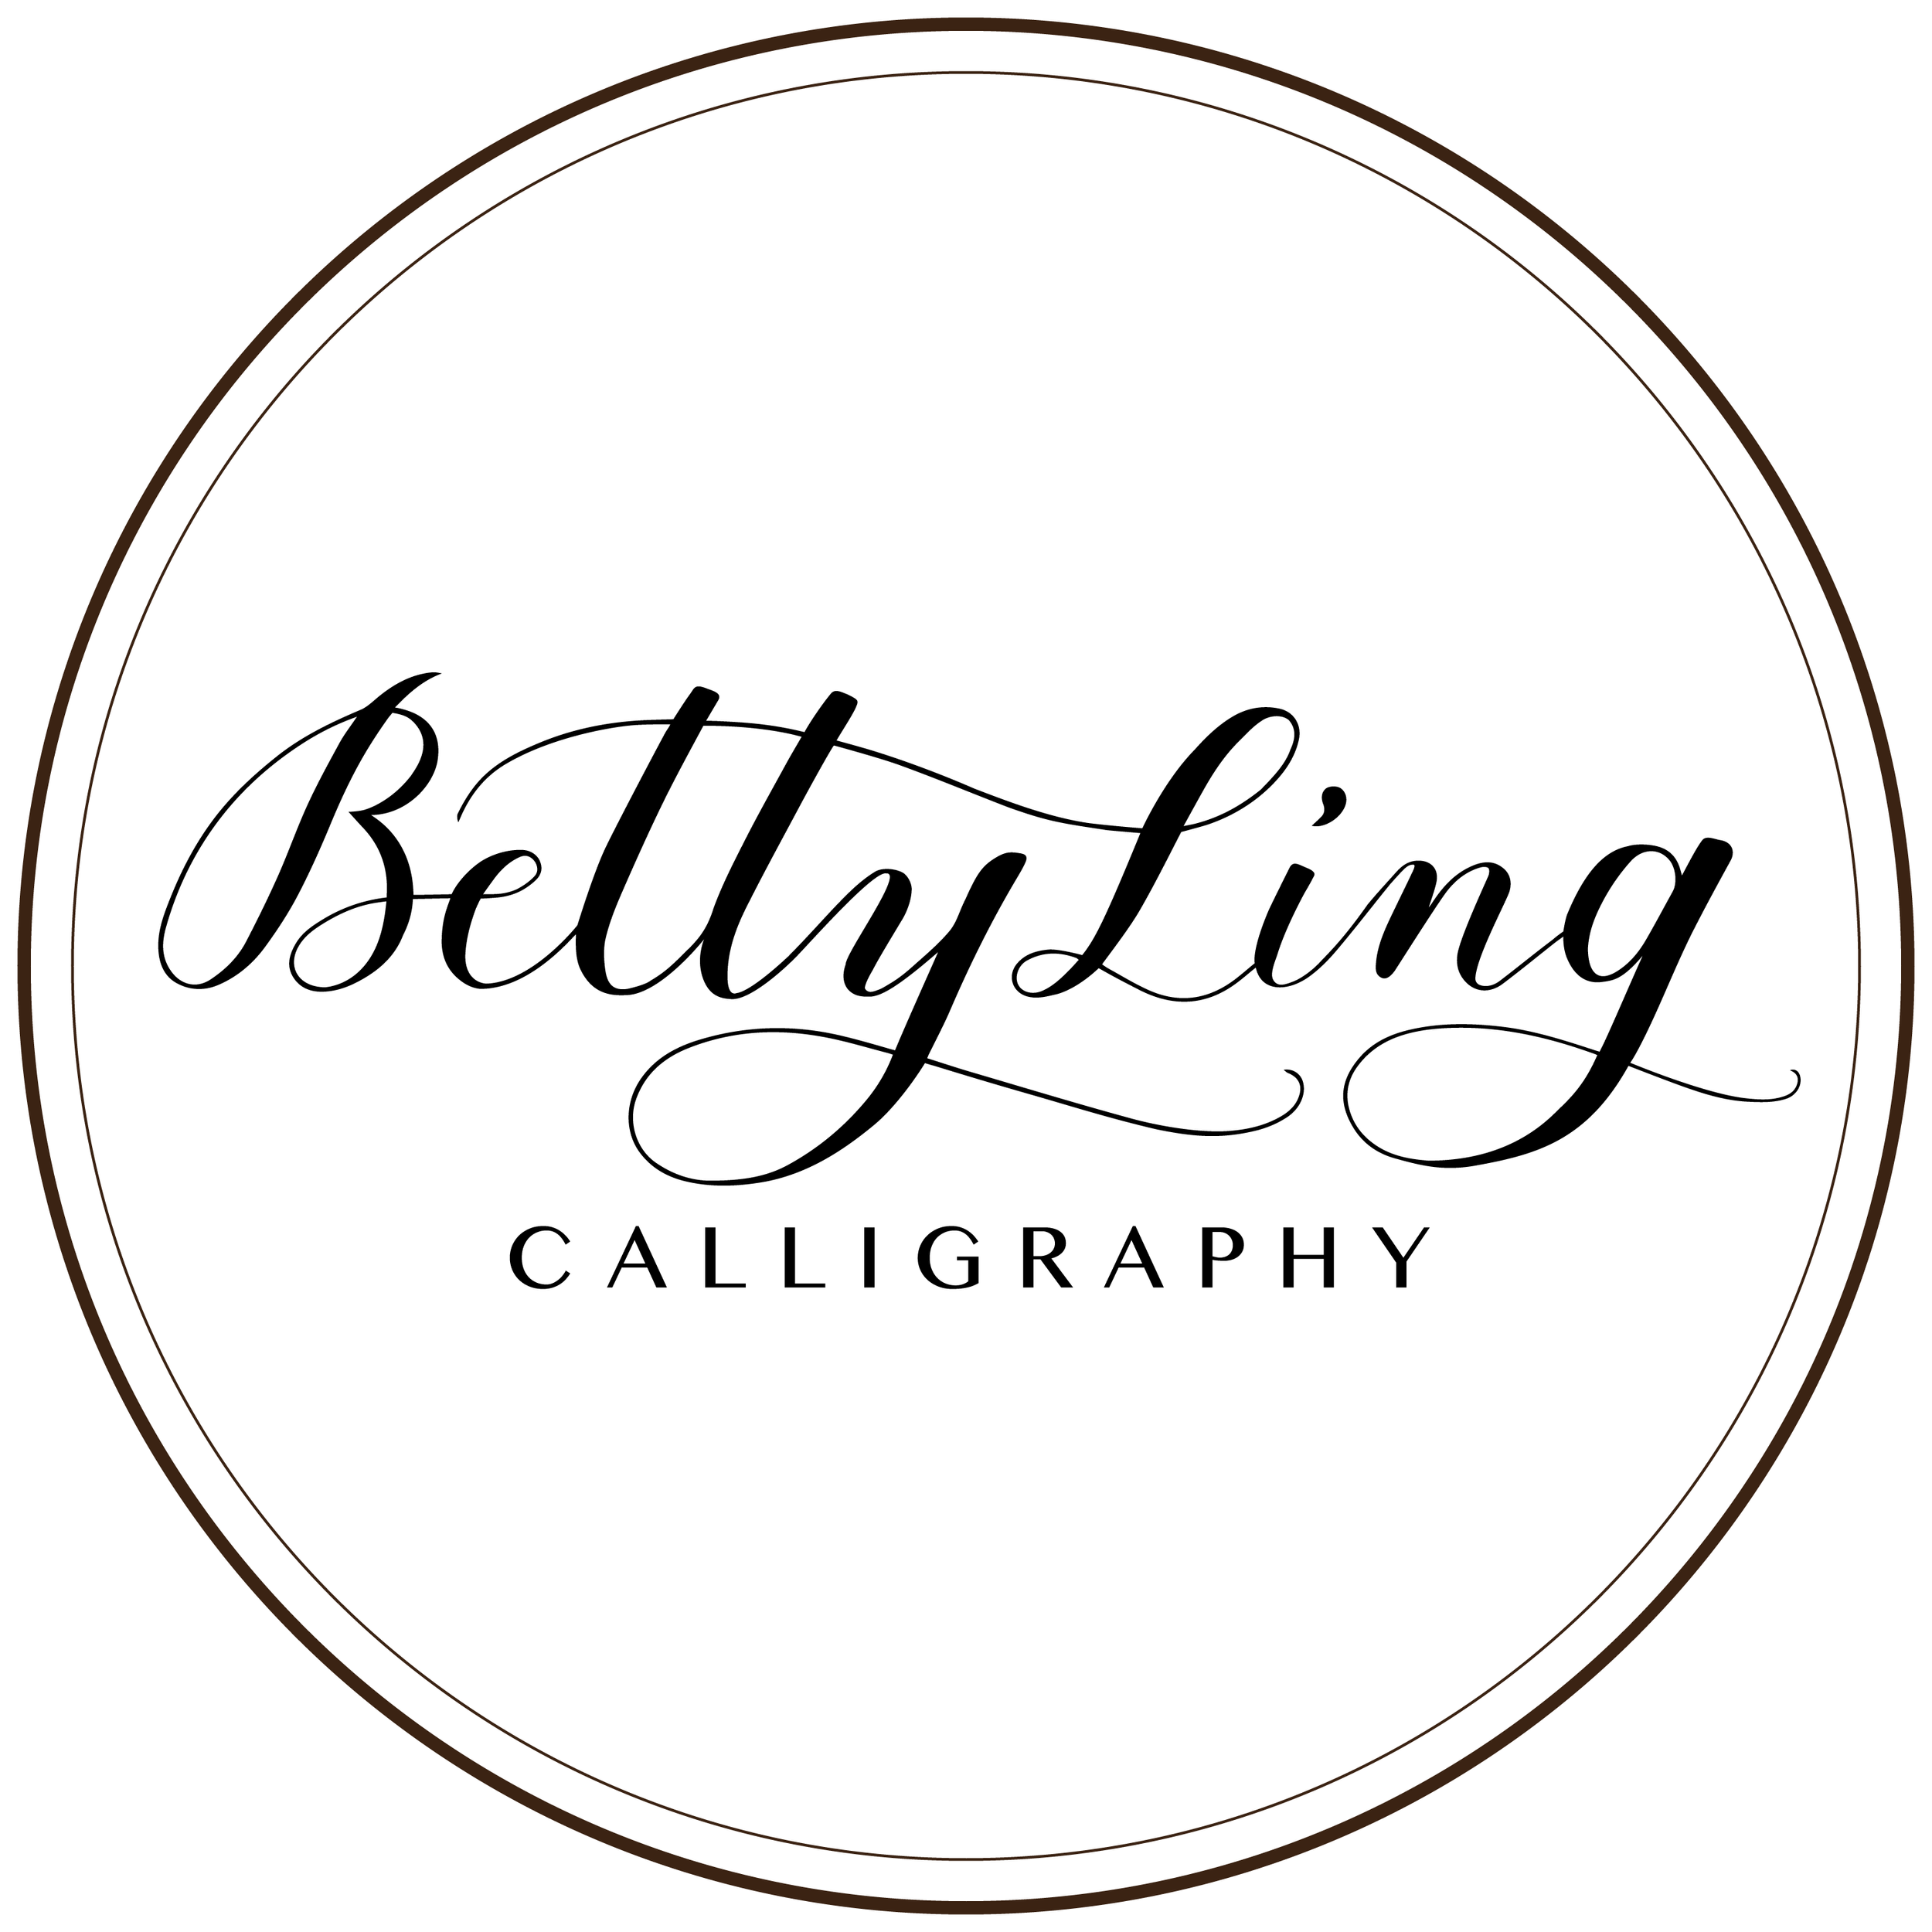 Los Angeles Calligrapher & Engraver for Brands